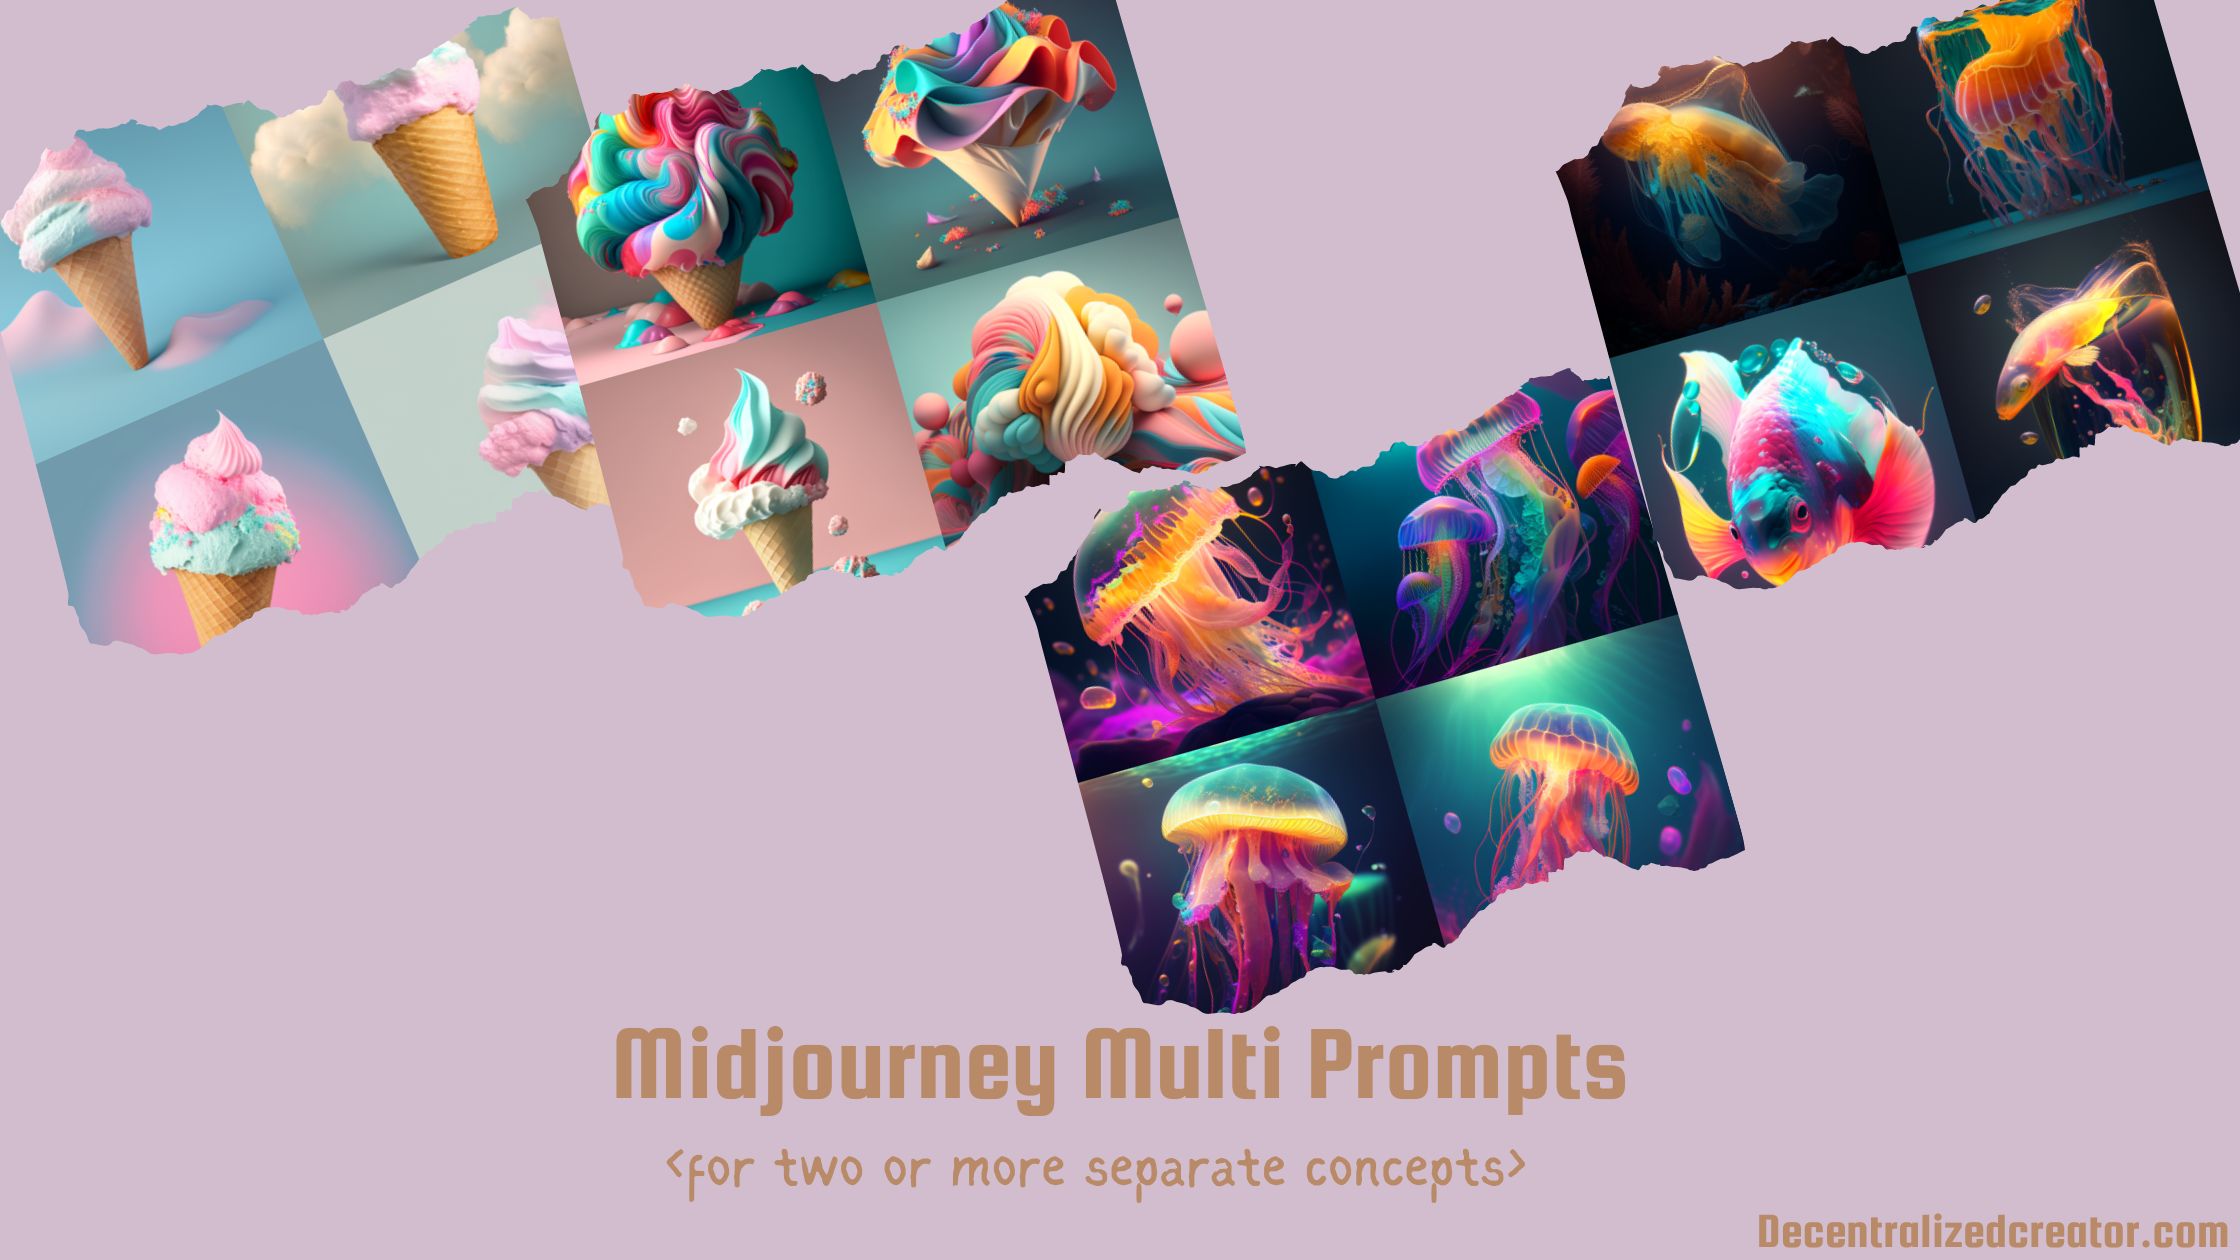 Midjourney Multi Prompts and How to Use Them